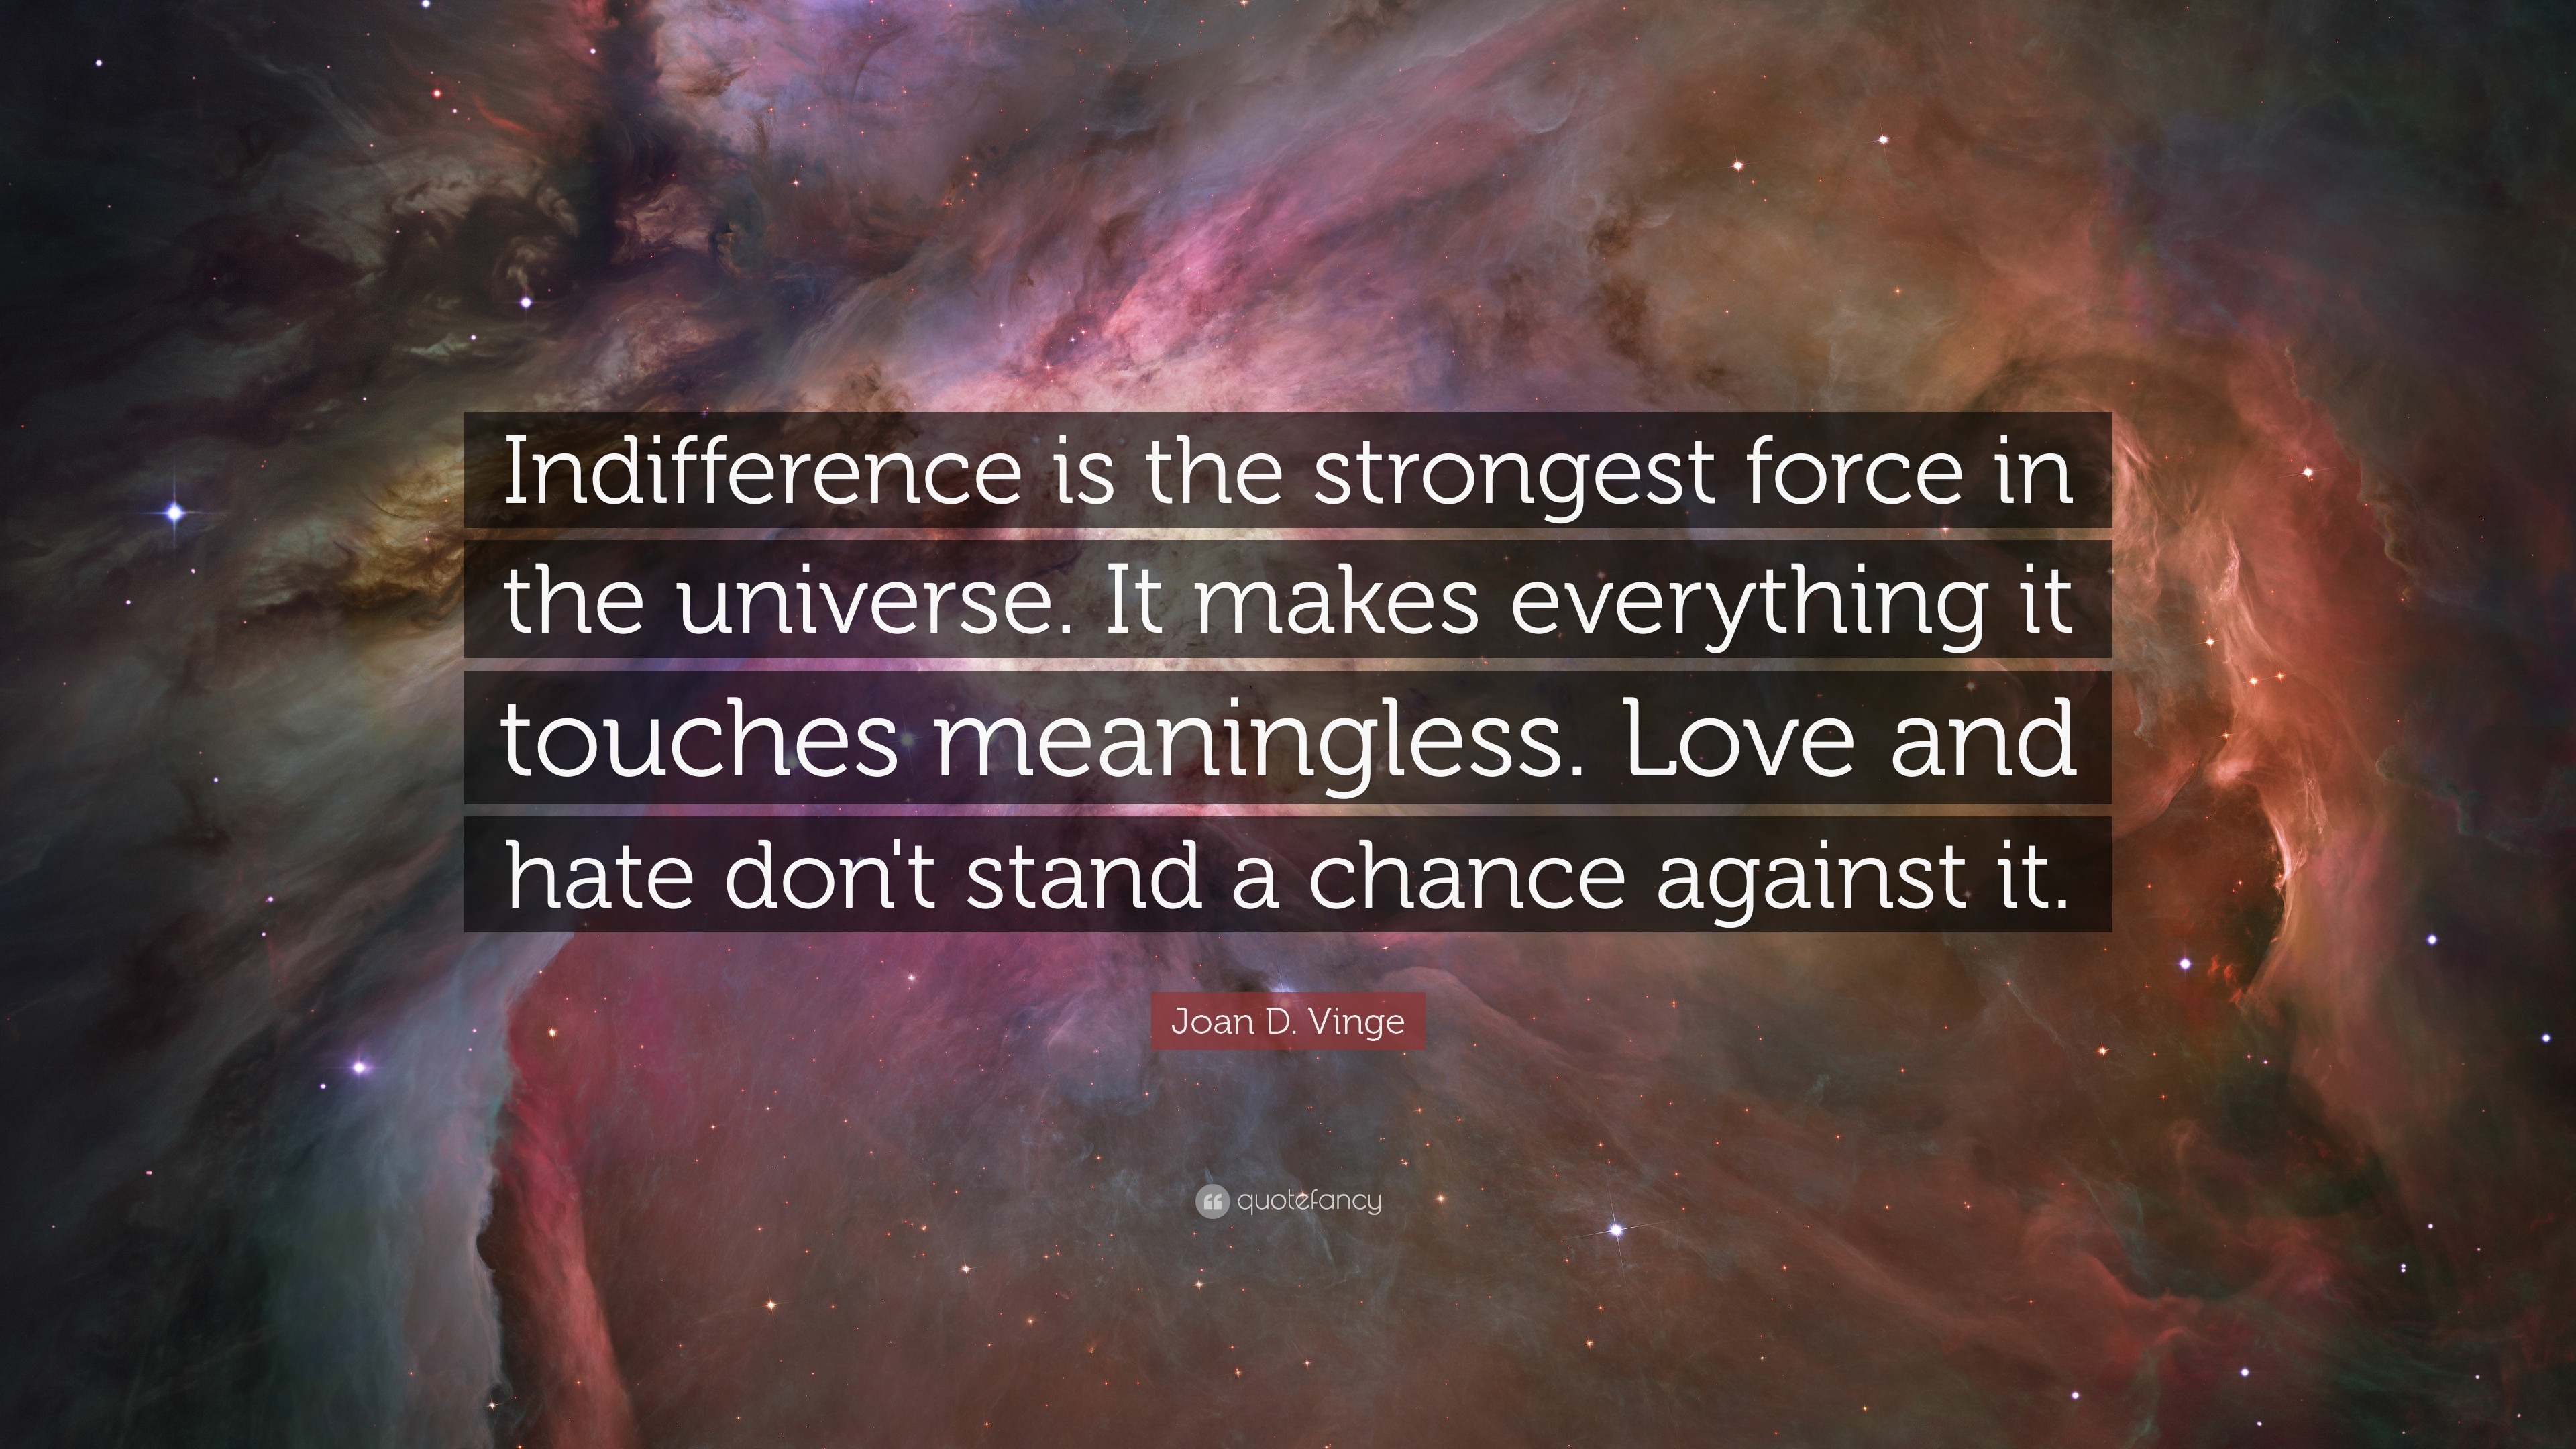 Joan D Vinge Quote “Indifference is the strongest force in the universe